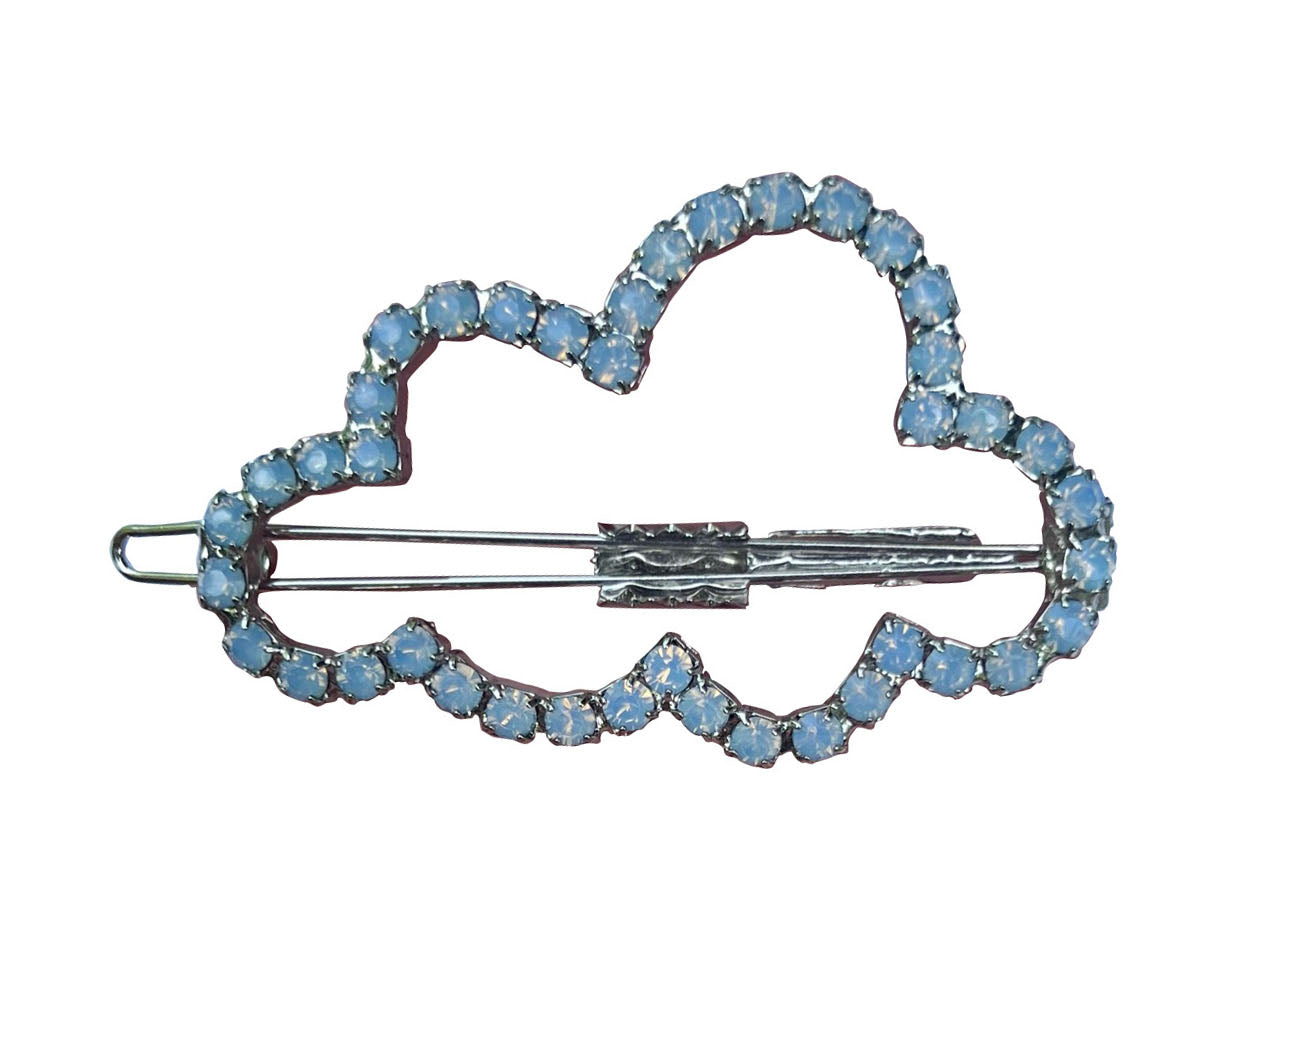 SWAROVSKI LE CLOUD BARRETTE IN AIRBLUE OPAL - Epona Valley | Luxury Hair Accessories | Bridal Accessories | Made In NYC